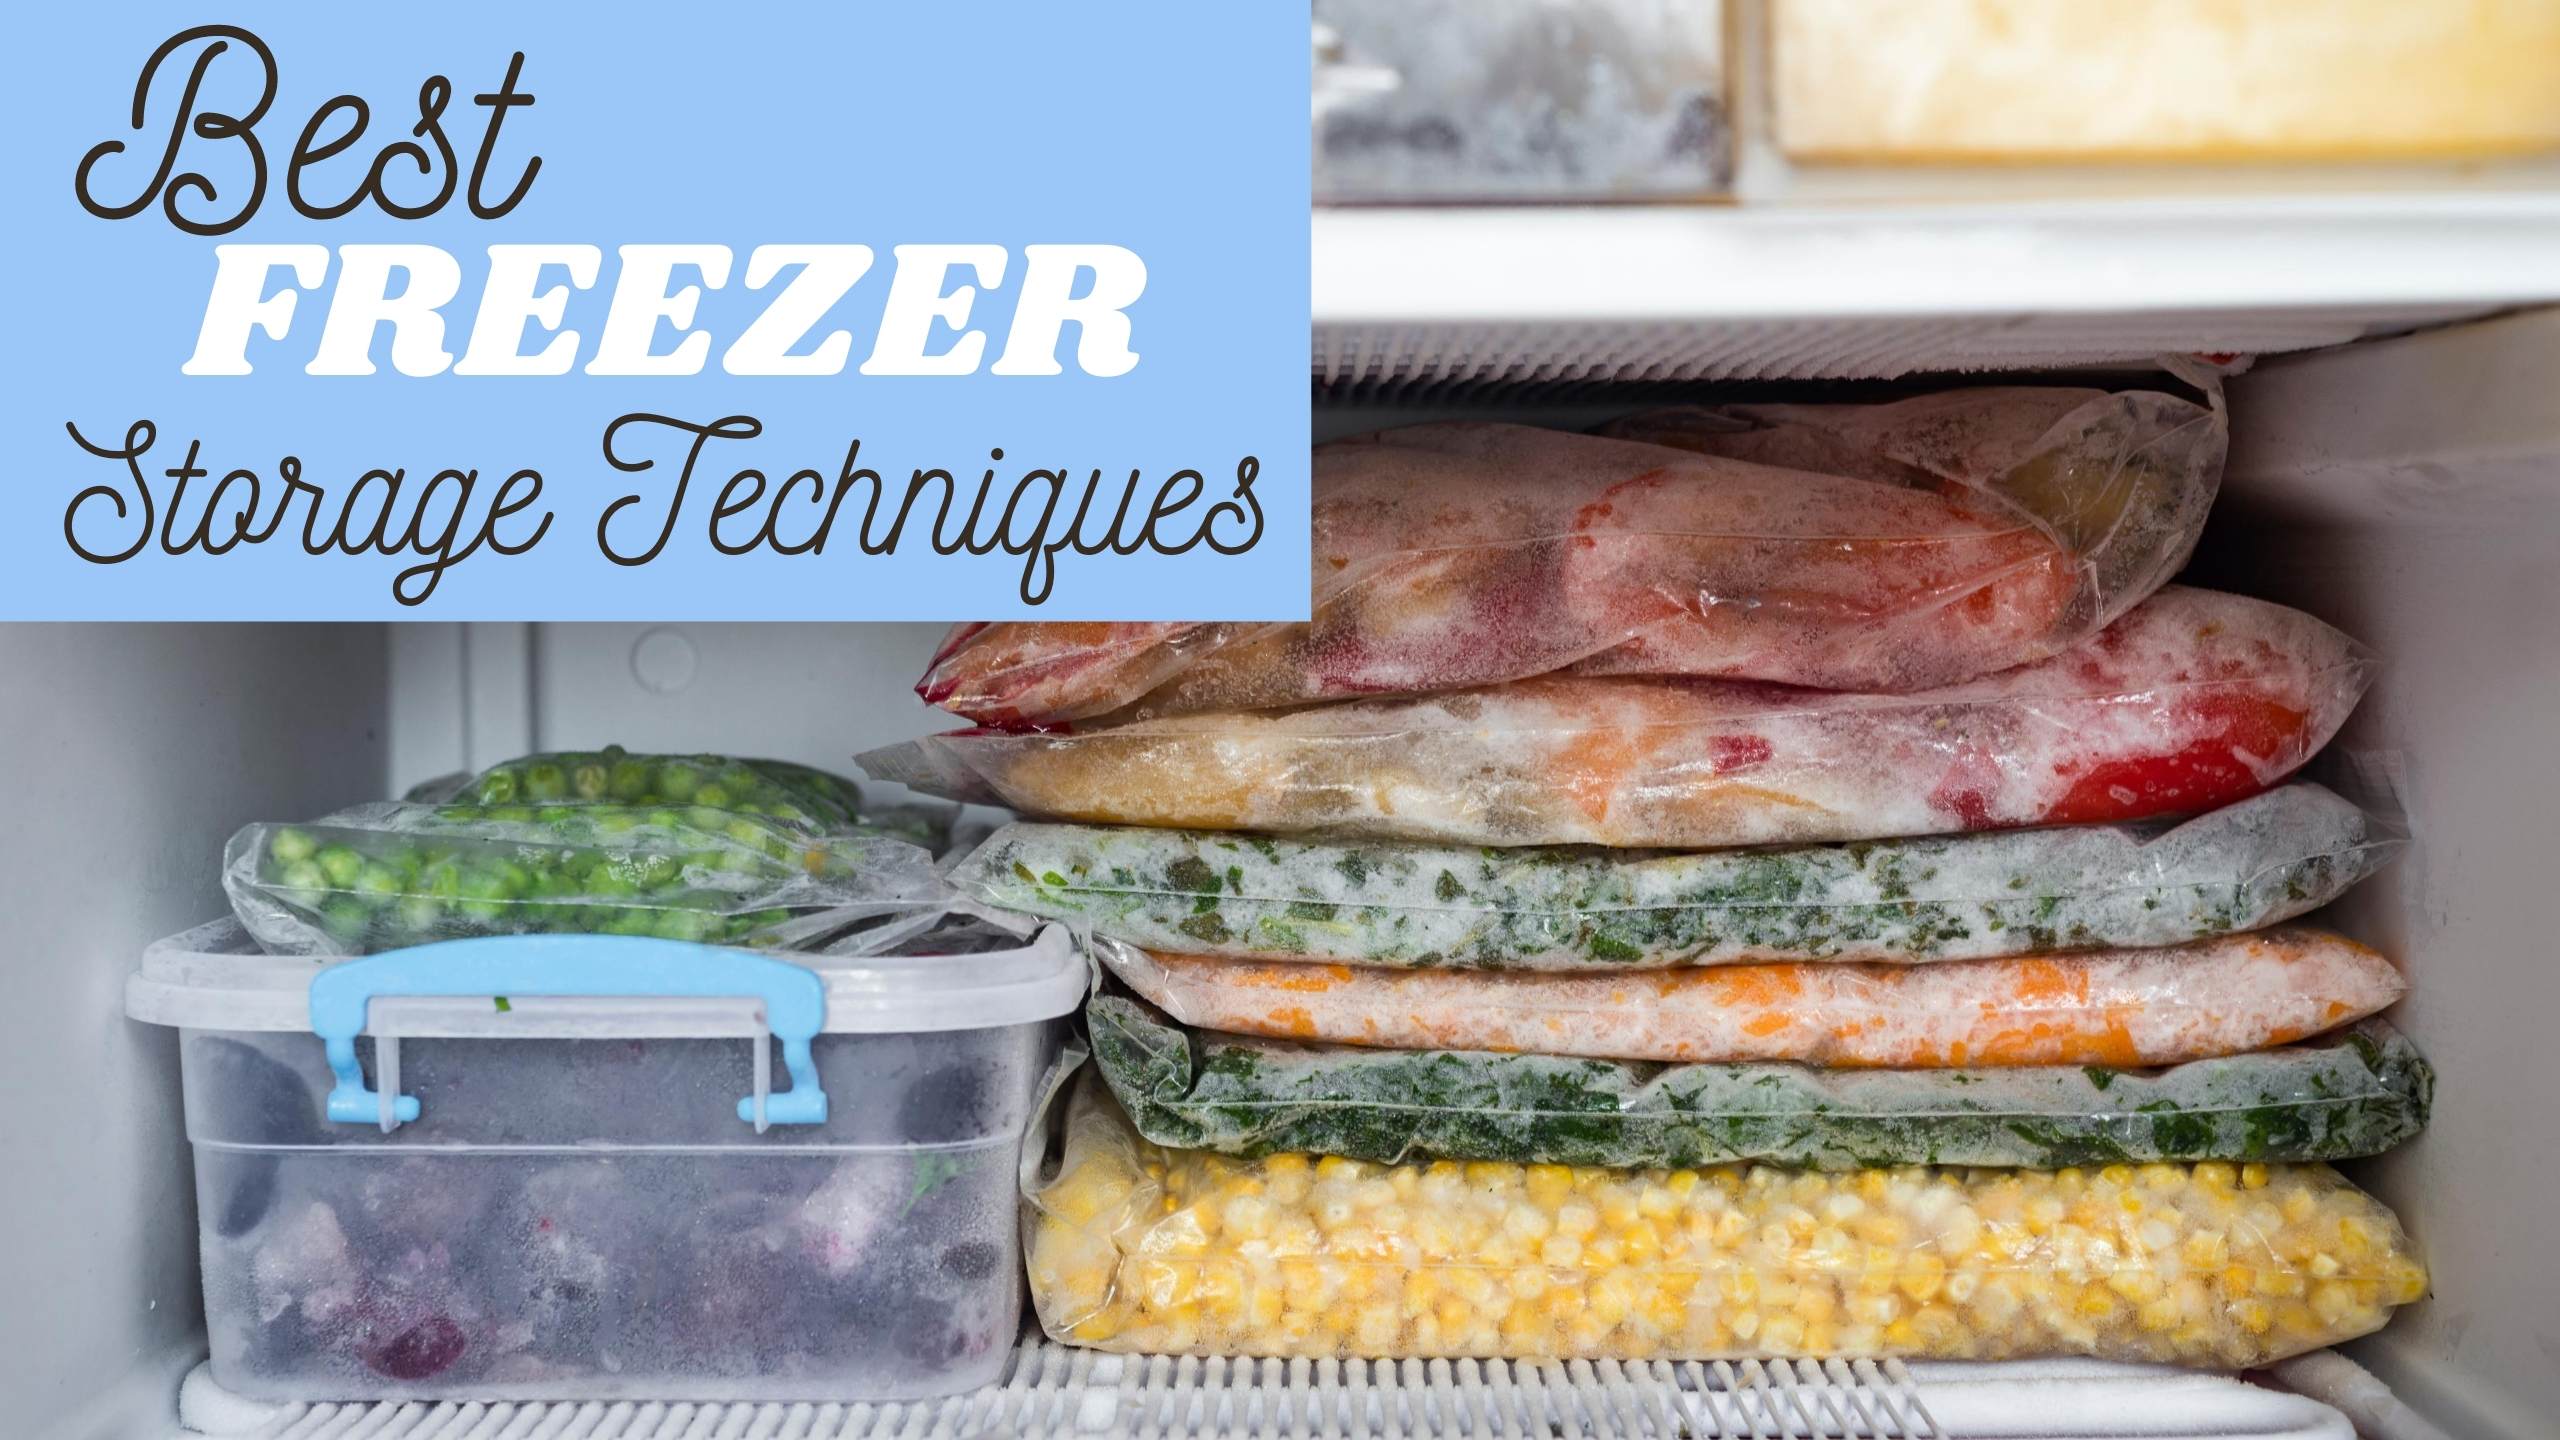 The Best Containers for Freezer Cooking - Freezer Meals 101